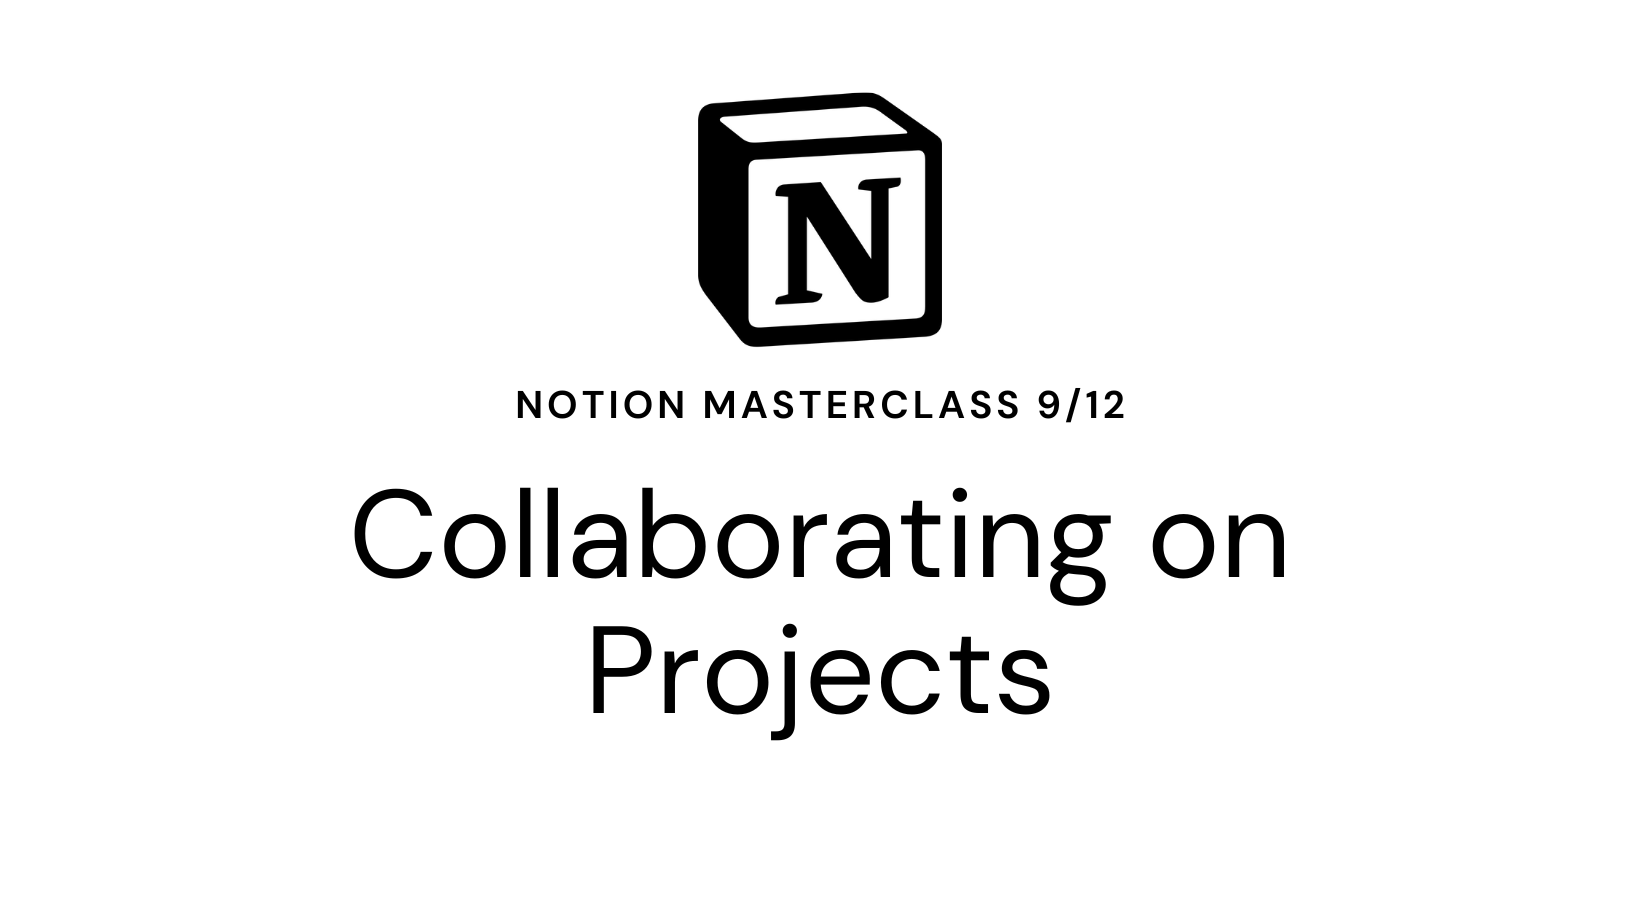 Collaborating with Notion: A Guide to Sharing and Collaborating on Projects